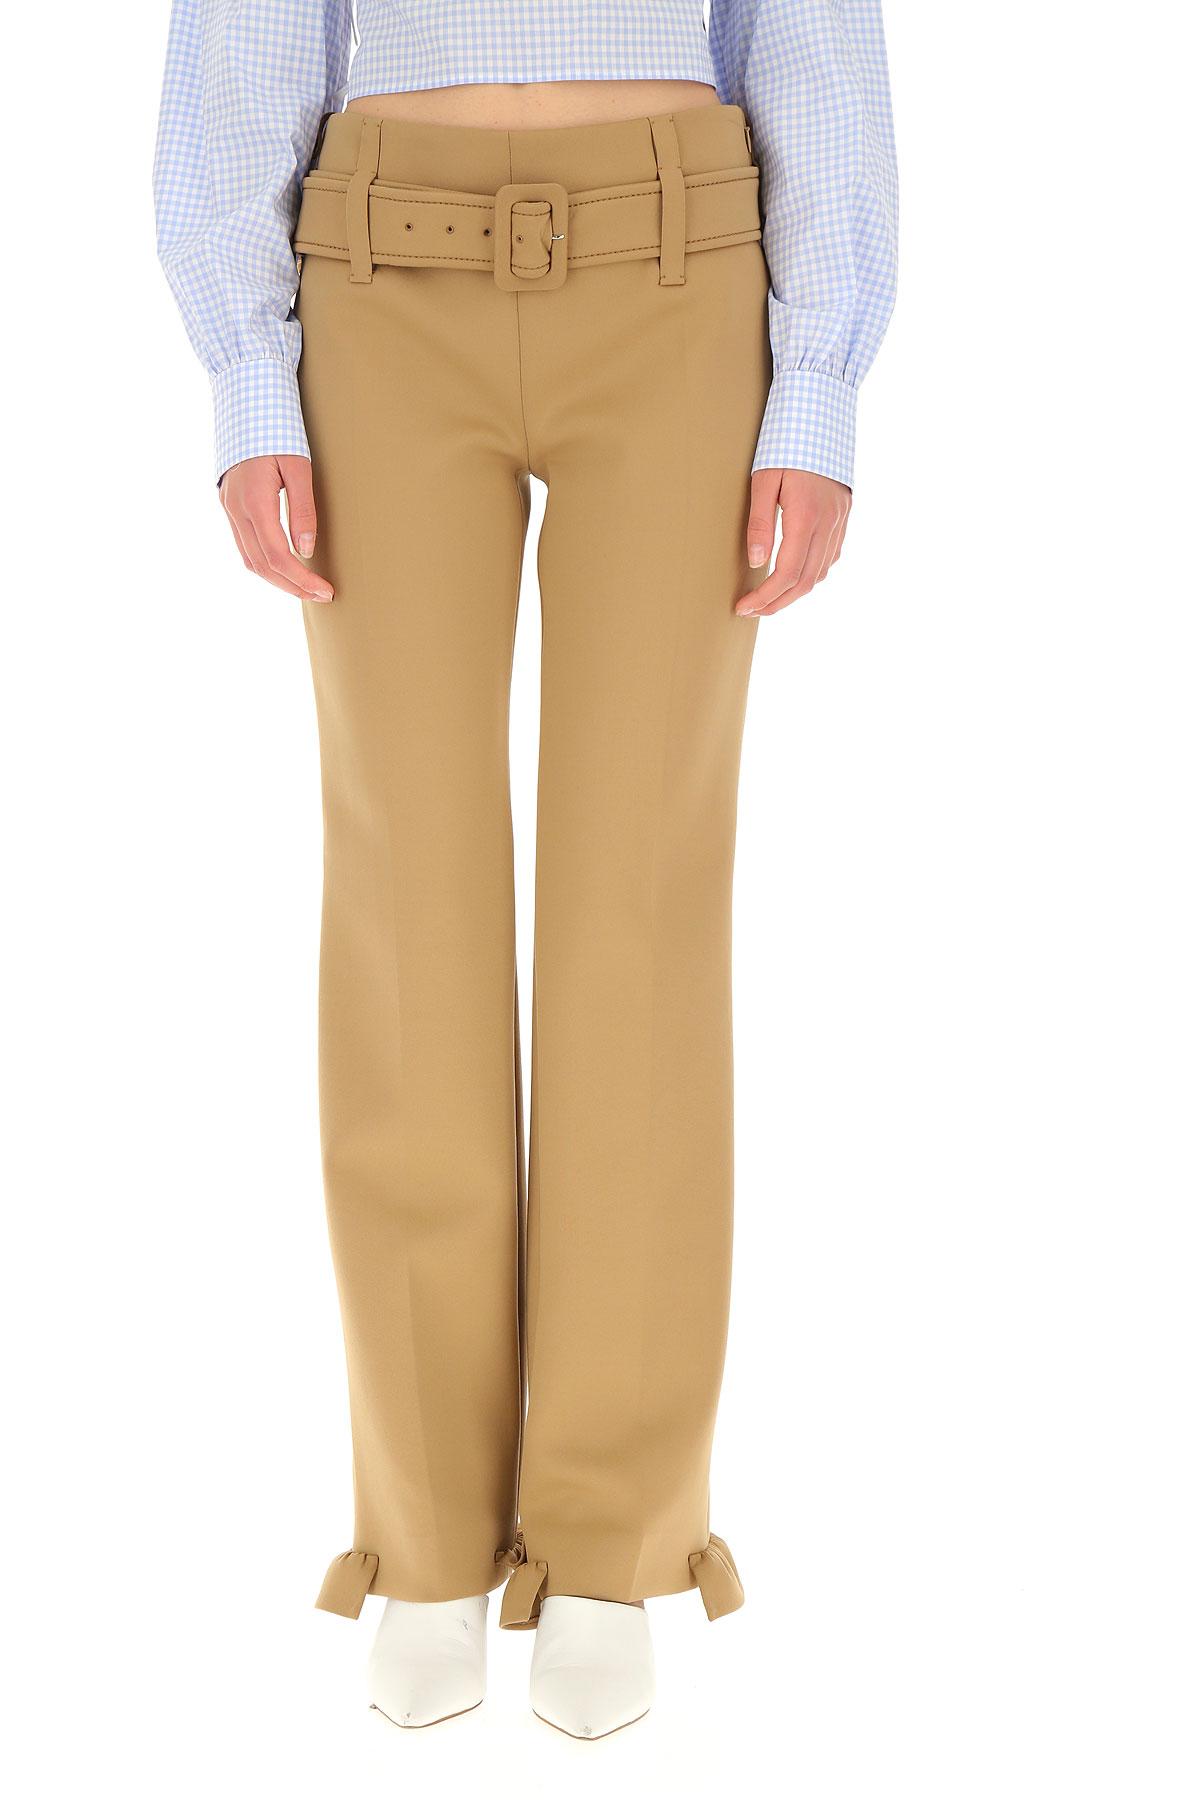 Prada Synthetic Technical Jersey Pants With Ruching in Camel (Natural ...